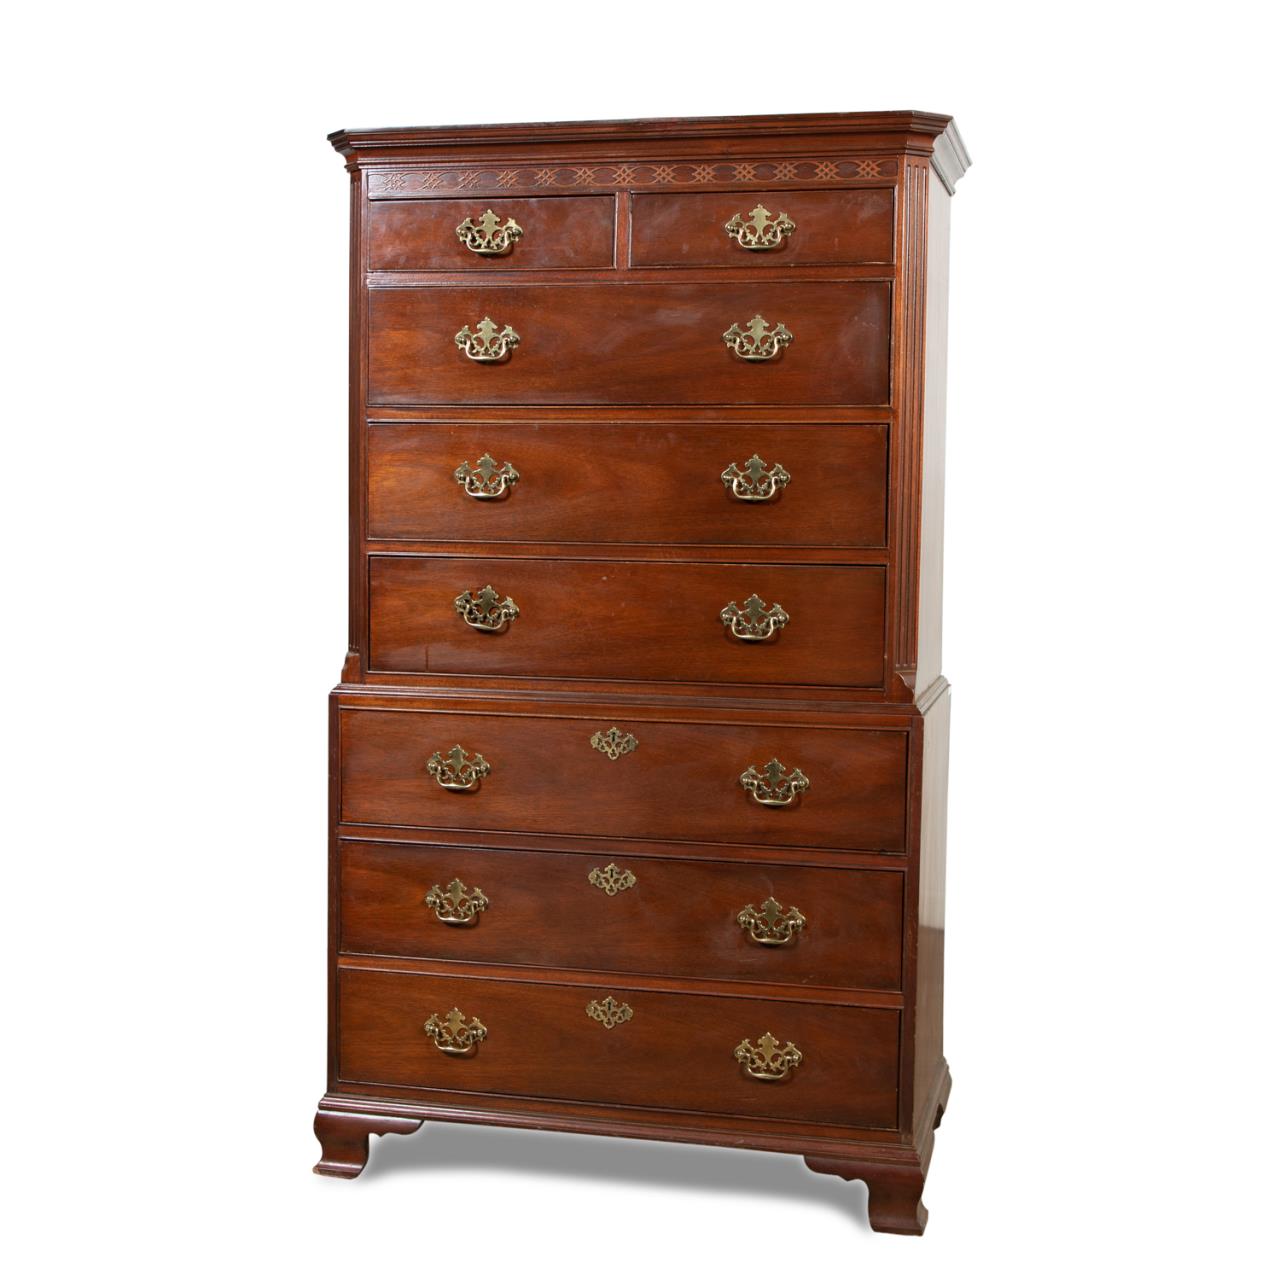 BAKER FURNITURE CHIPPENDALE STYLE 358173